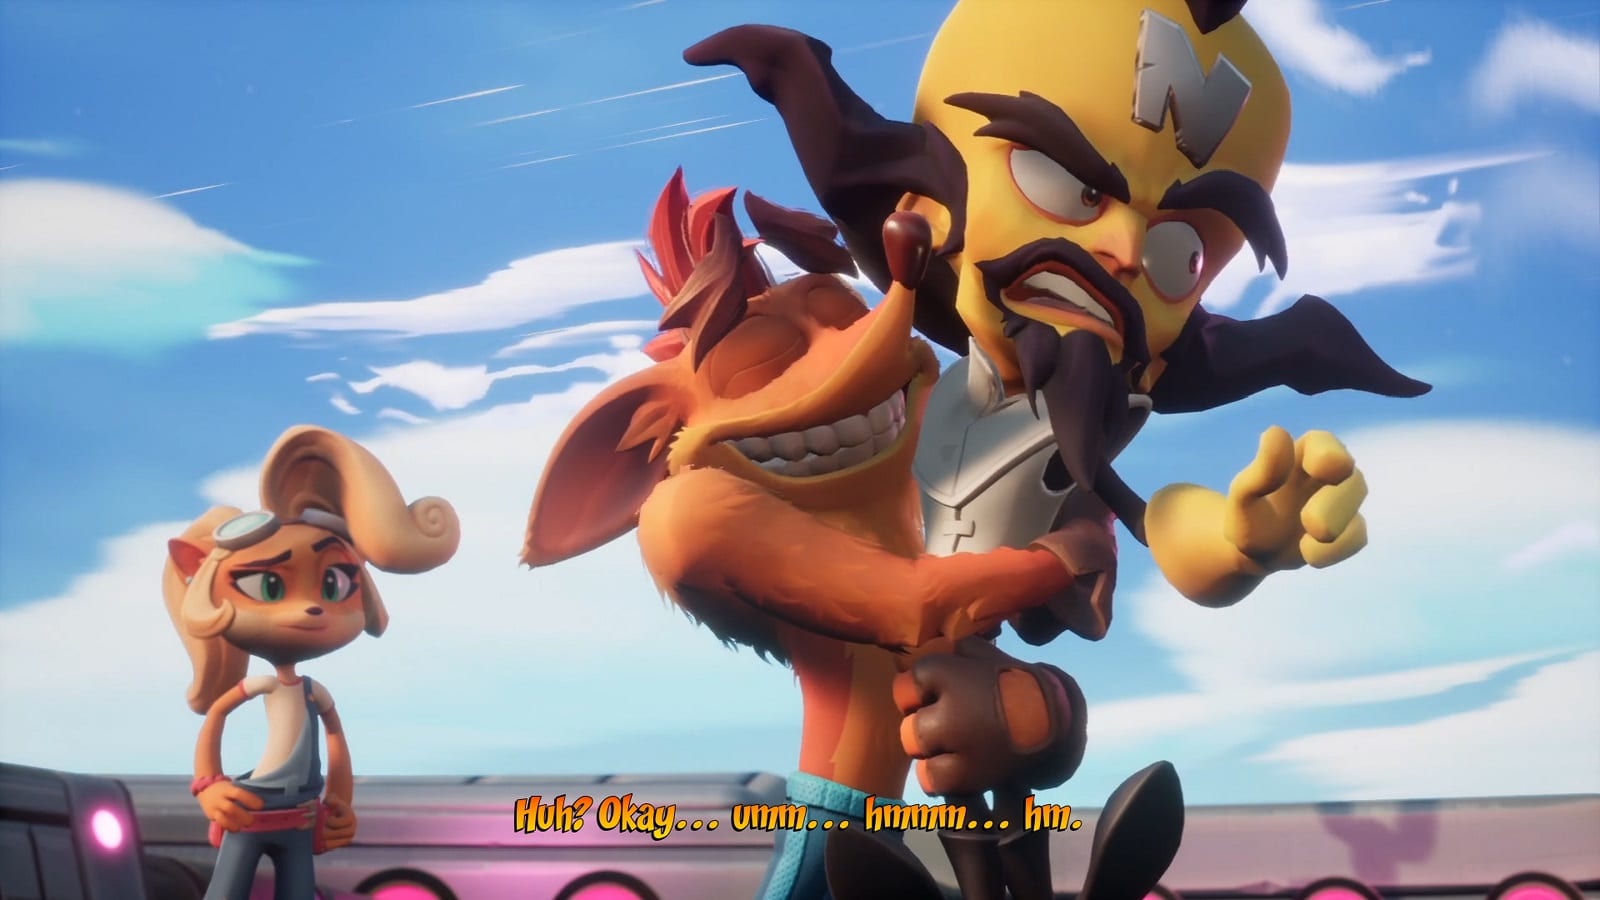 Why Crash Bandicoot Would Be Perfect for Super Smash Bros. Ultimate